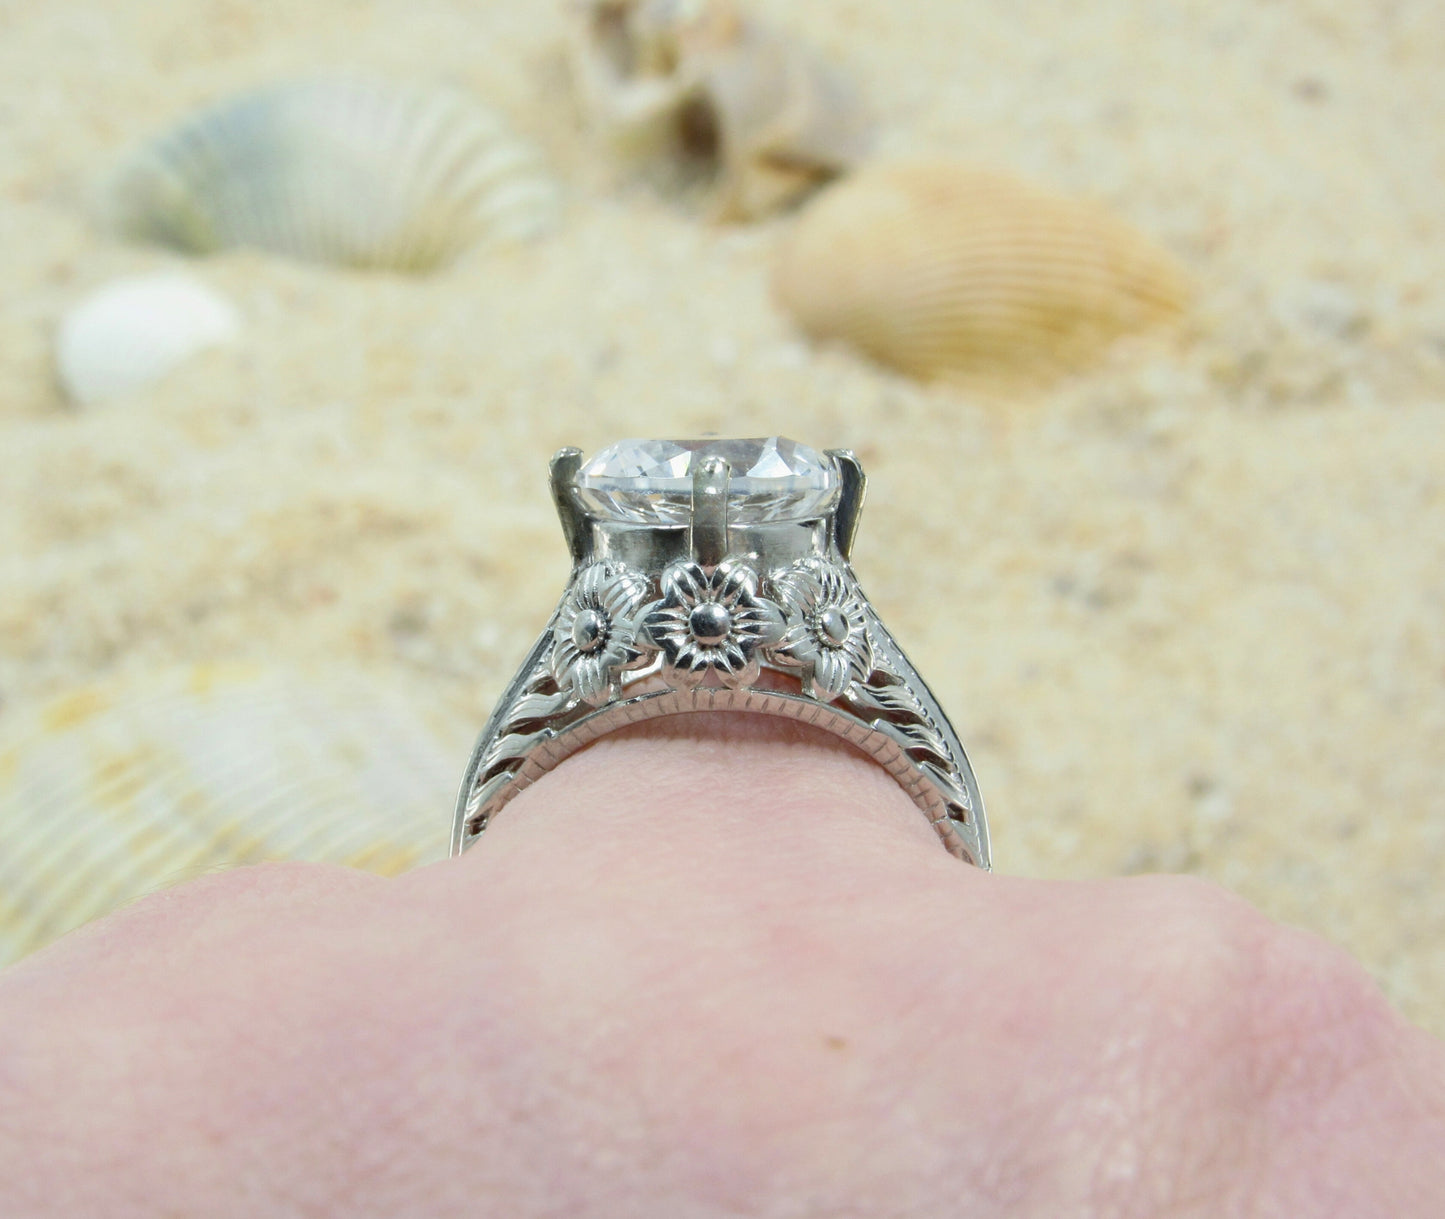 White Sapphire Engagement Ring, Antique Vintage Style Ring, Filigree Floral Flower detail Ring, 5cts 10mm, Ready to Ship